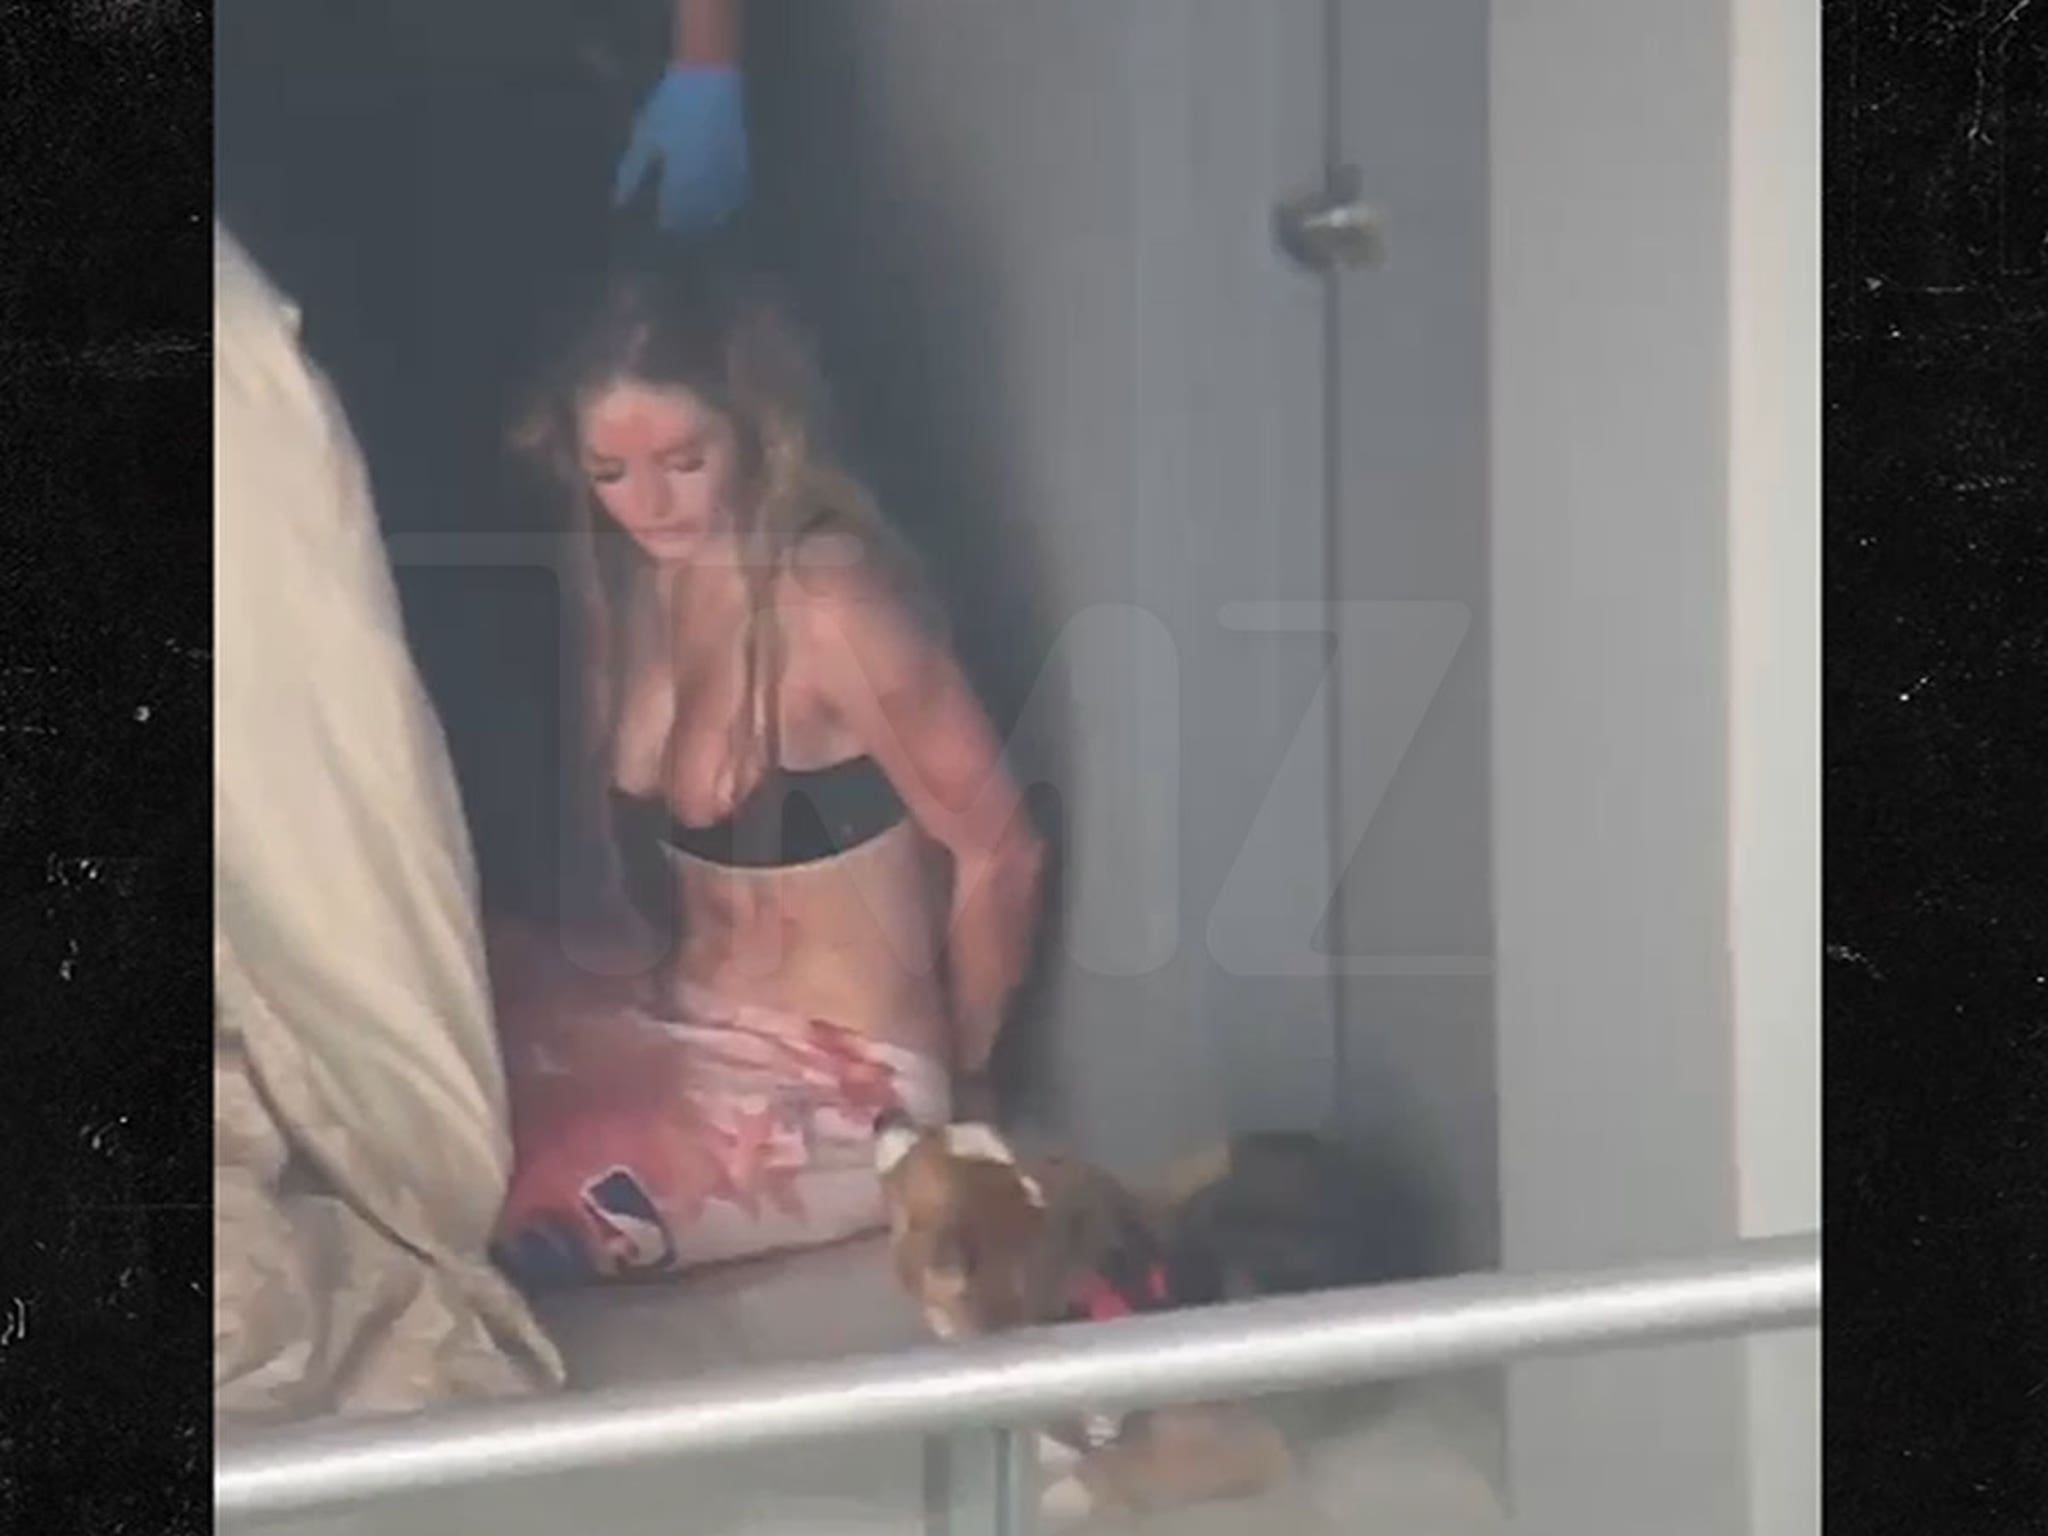 Video From Fatal Miami Stabbing Shows IG Model Covered In Blood pic